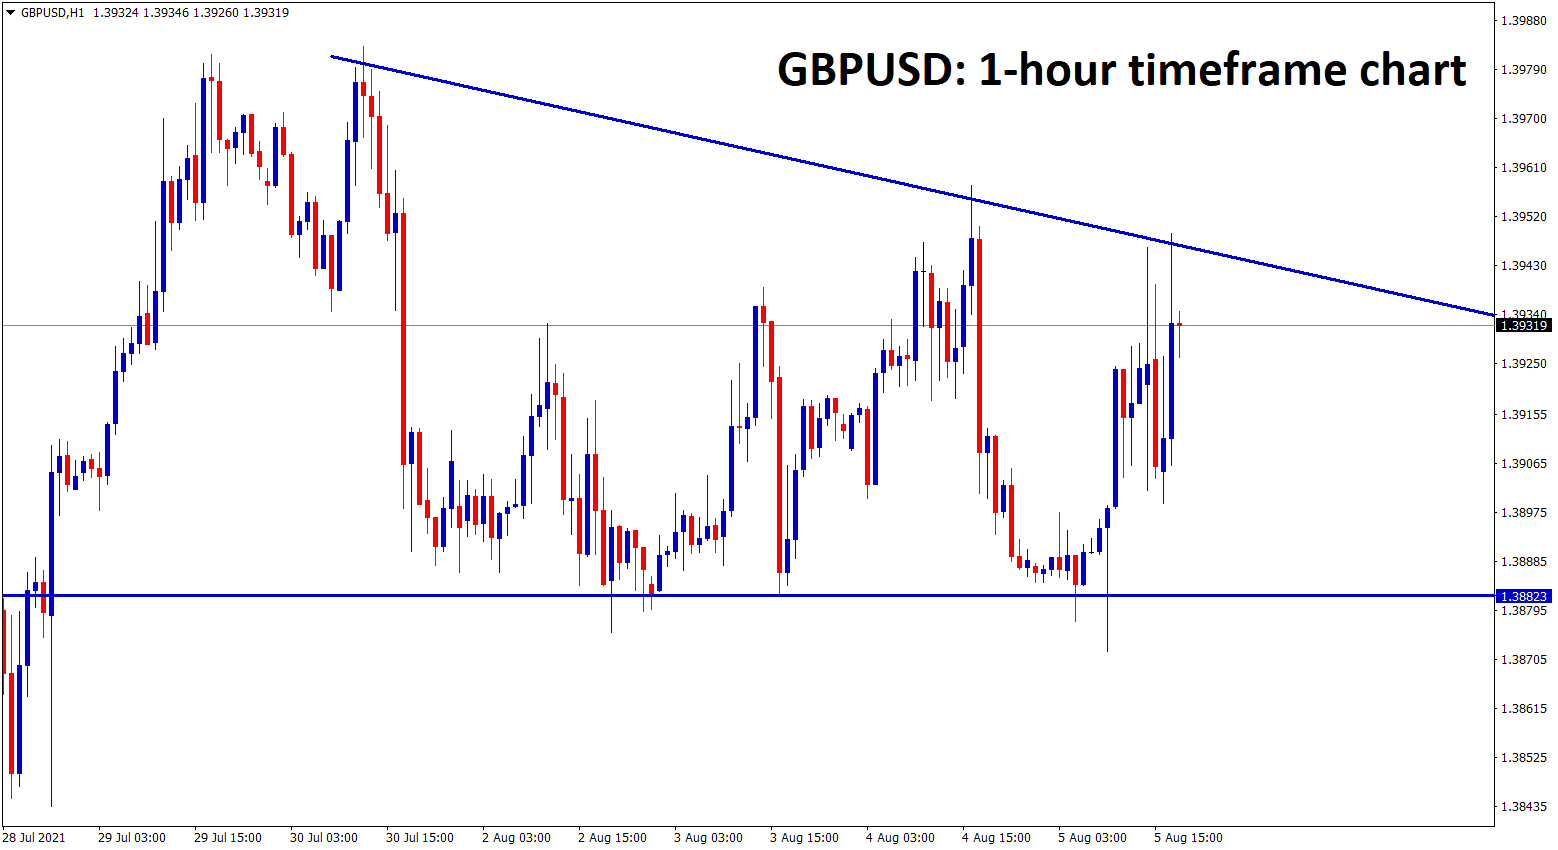 GBPUSD is moving in a descending triangle pattern